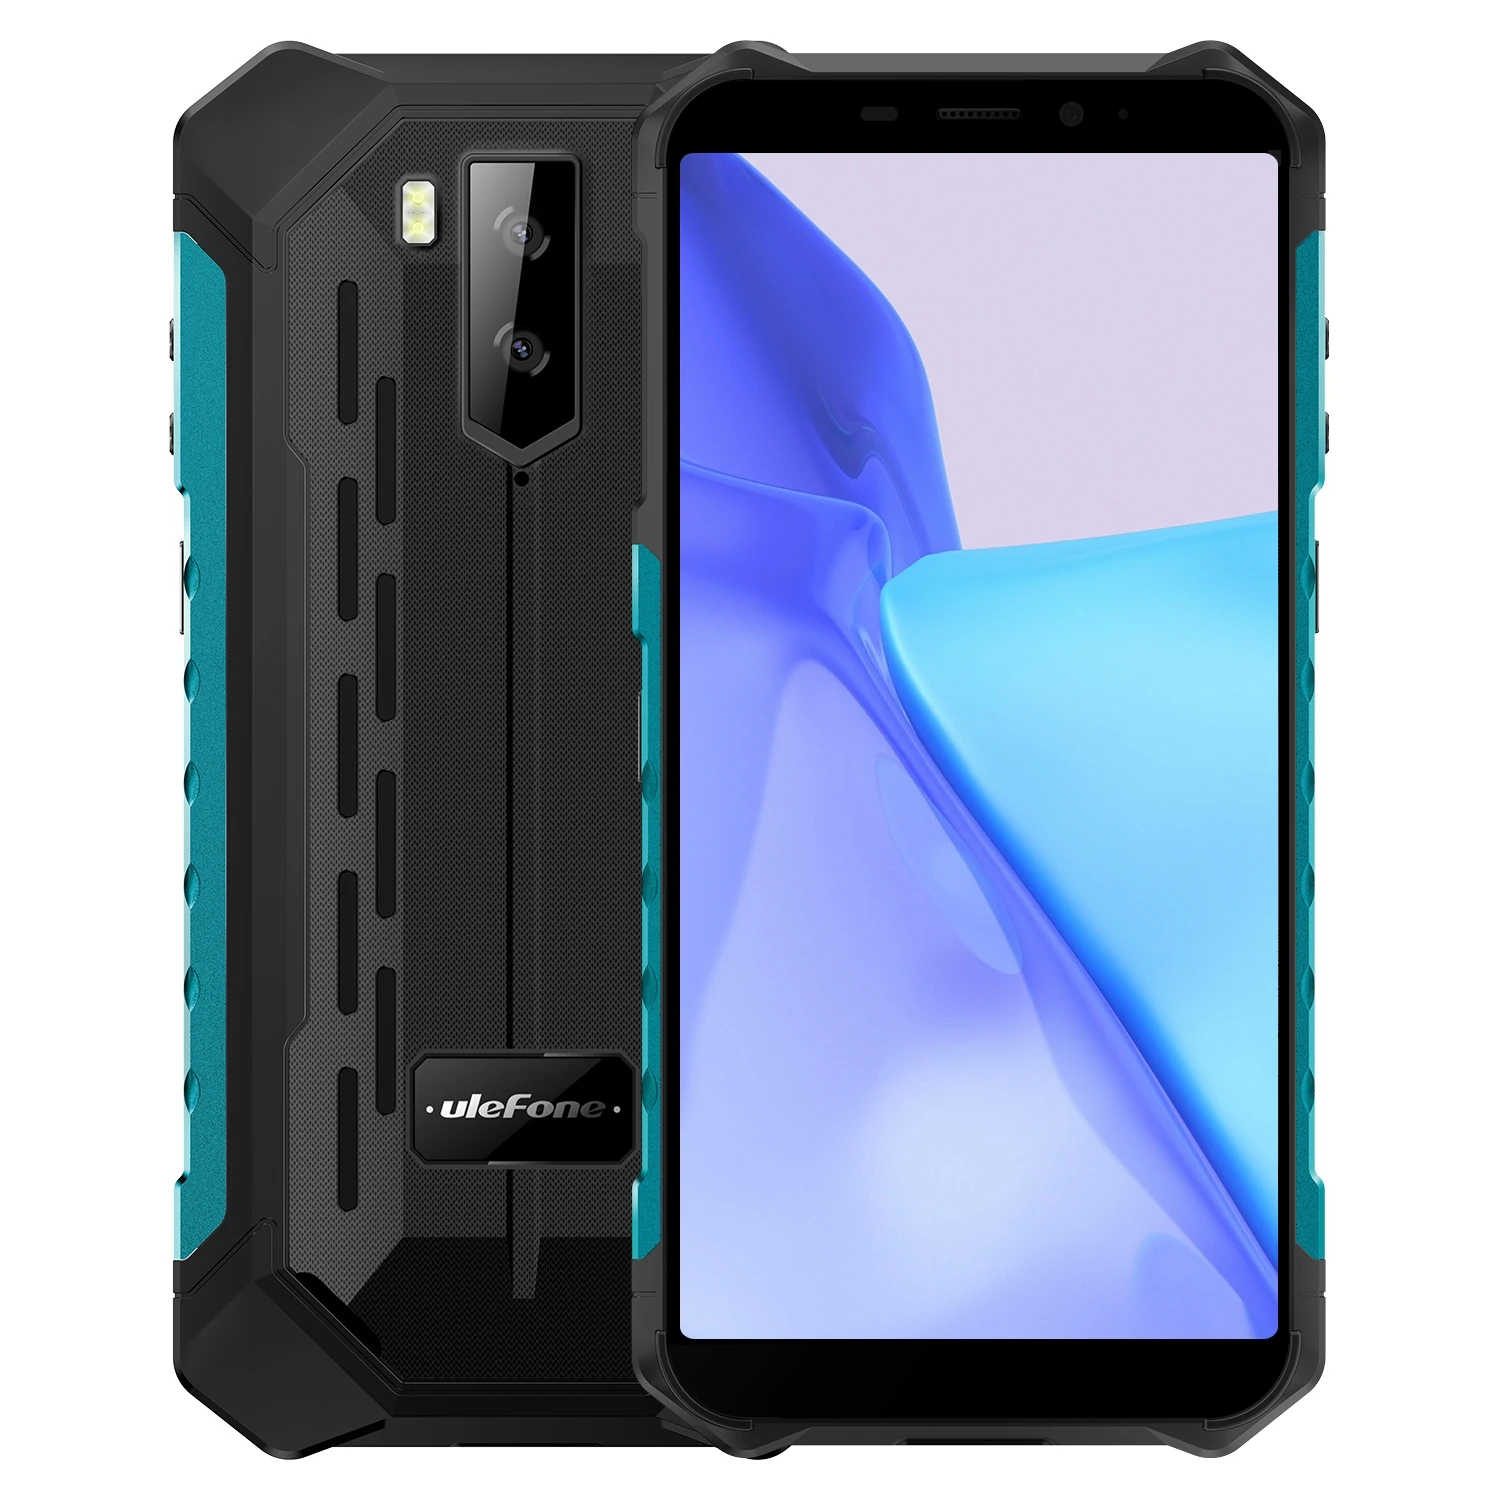 Ulefone Armor X9 Pro Rugged Phone 4GB 64GB Face Unlock 5.5" Android 11 Helio A25 Octa Core 5000mAh Global 4G OTG NFC Smartphone good cell phone for gaming